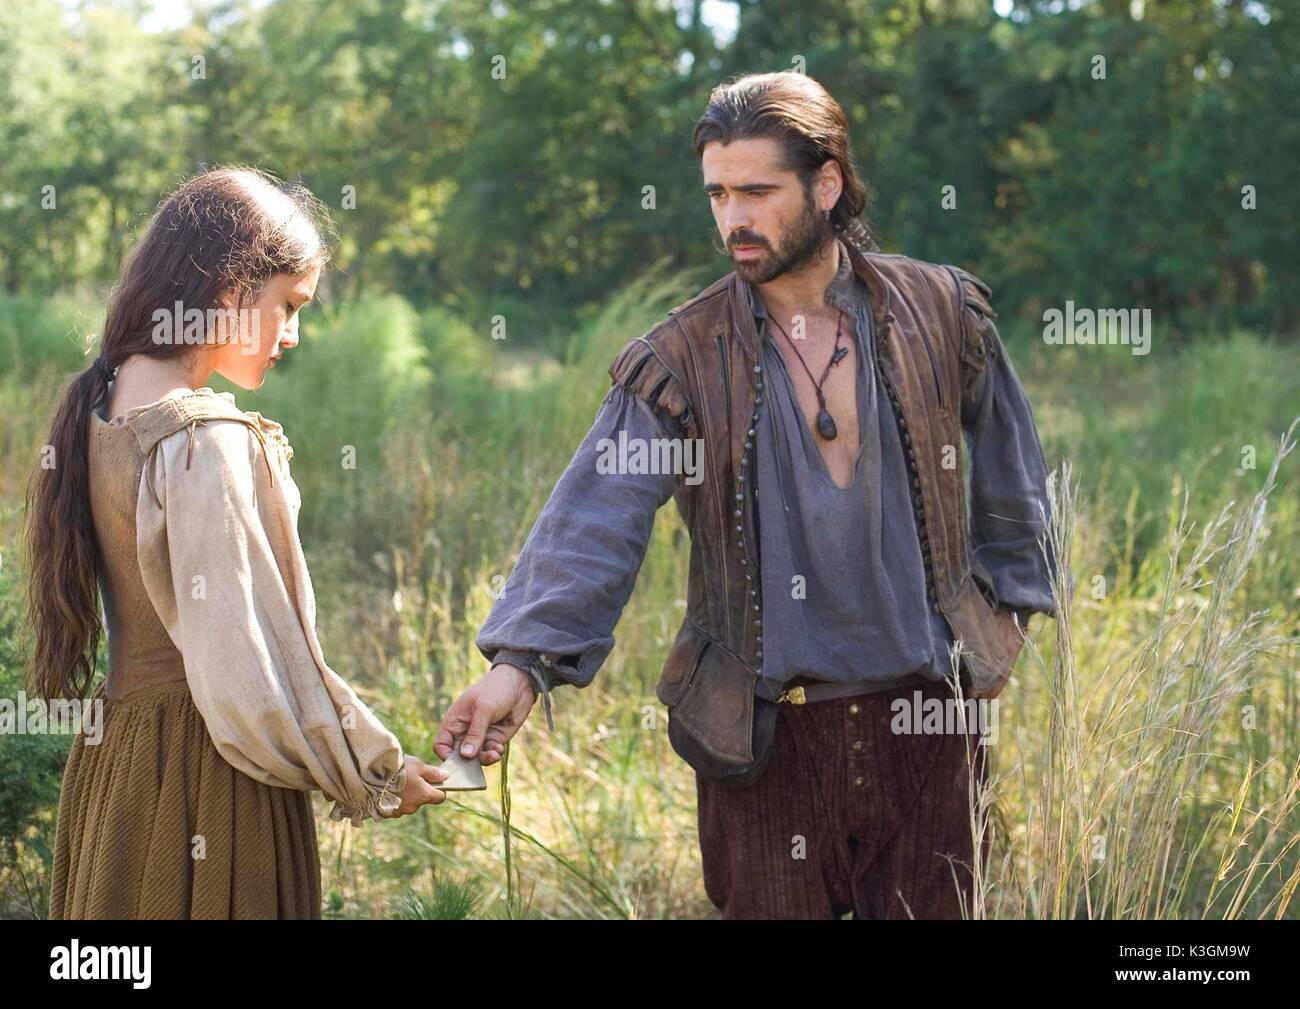 NW-DF-19880 Q'orianka Kilcher as Pocahontas with Colin Farrell as Captain John Smith and in New Line Cinema's upcoming film, The New World.  The sweeping adventure is set amid the encounter of European and Native American cultures during the founding of the Jamestown, Virginia settlement in 1607. Photo:  &#xf87f;2005 Merie Wallace, SMPSP/New Line Productions  THE NEW WORLD [US 2005]  Q'ORIANKA KILCHER as Pocahontas, COLIN FARRELL as Captain John Smith NW-DF-19880 Qorianka Kilcher as Pocahontas with Colin Farrell as Captain John Smith and in N Stock Photo